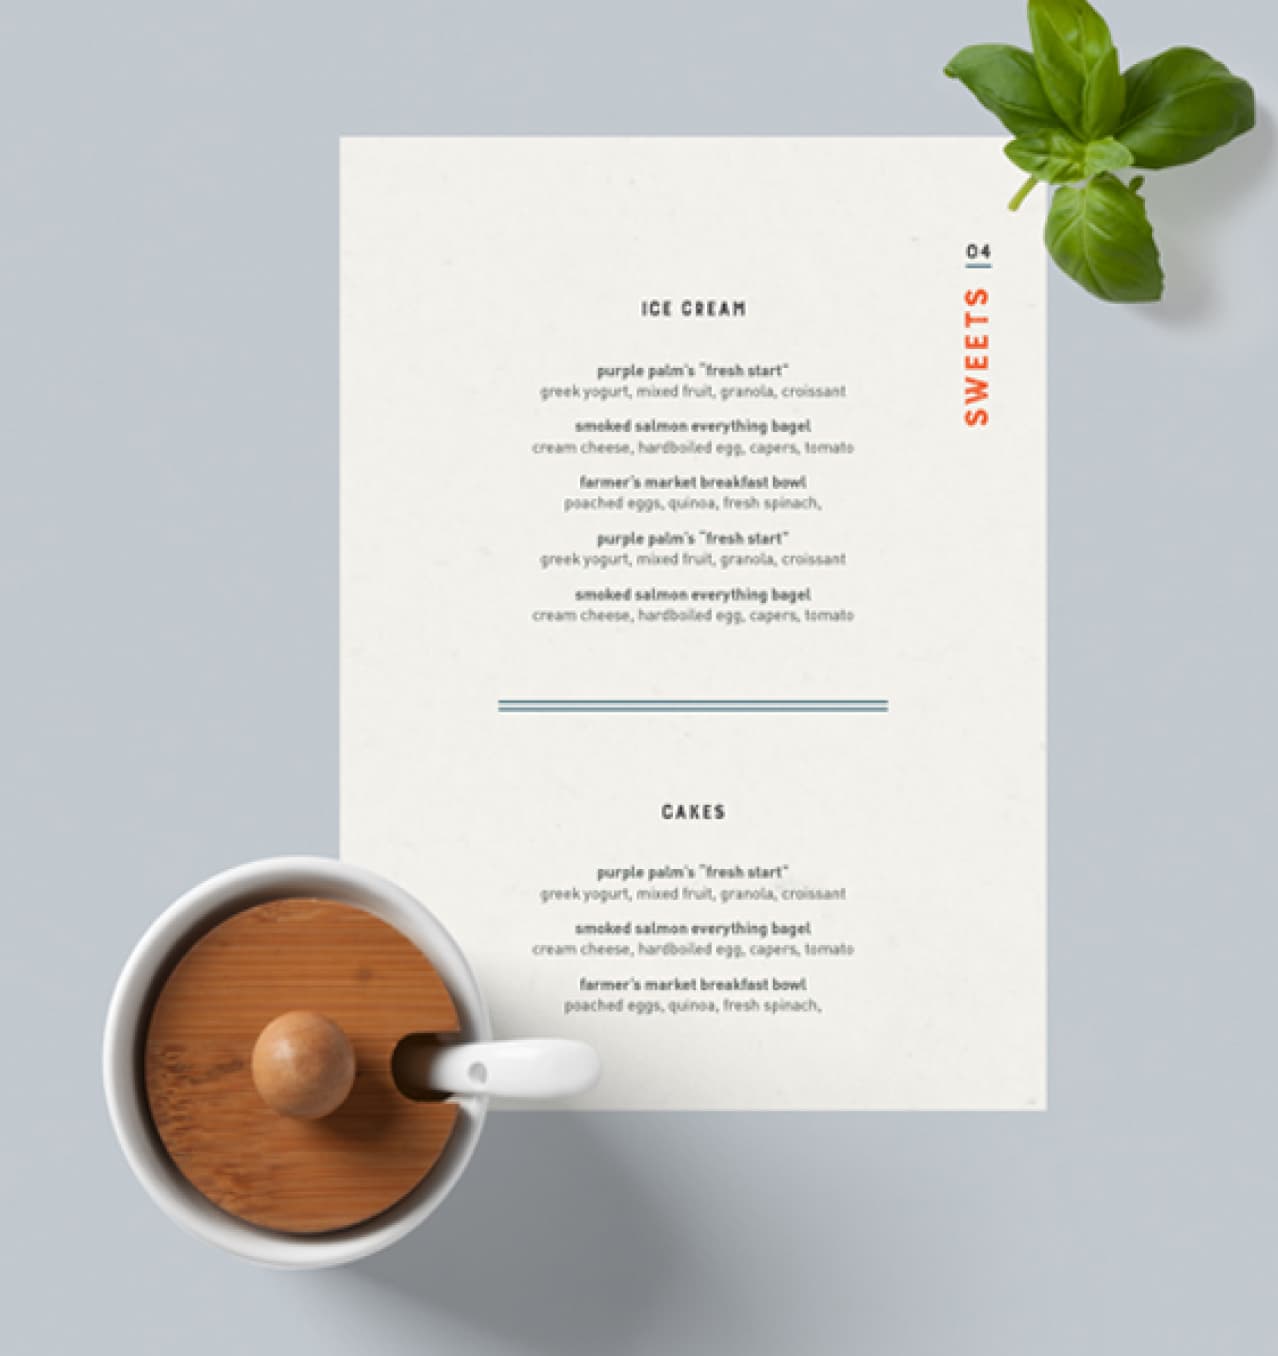 A dessert menu card listing ice cream and cake options, accompanied by a small pot with a wooden lid, suggesting a refined dining experience.